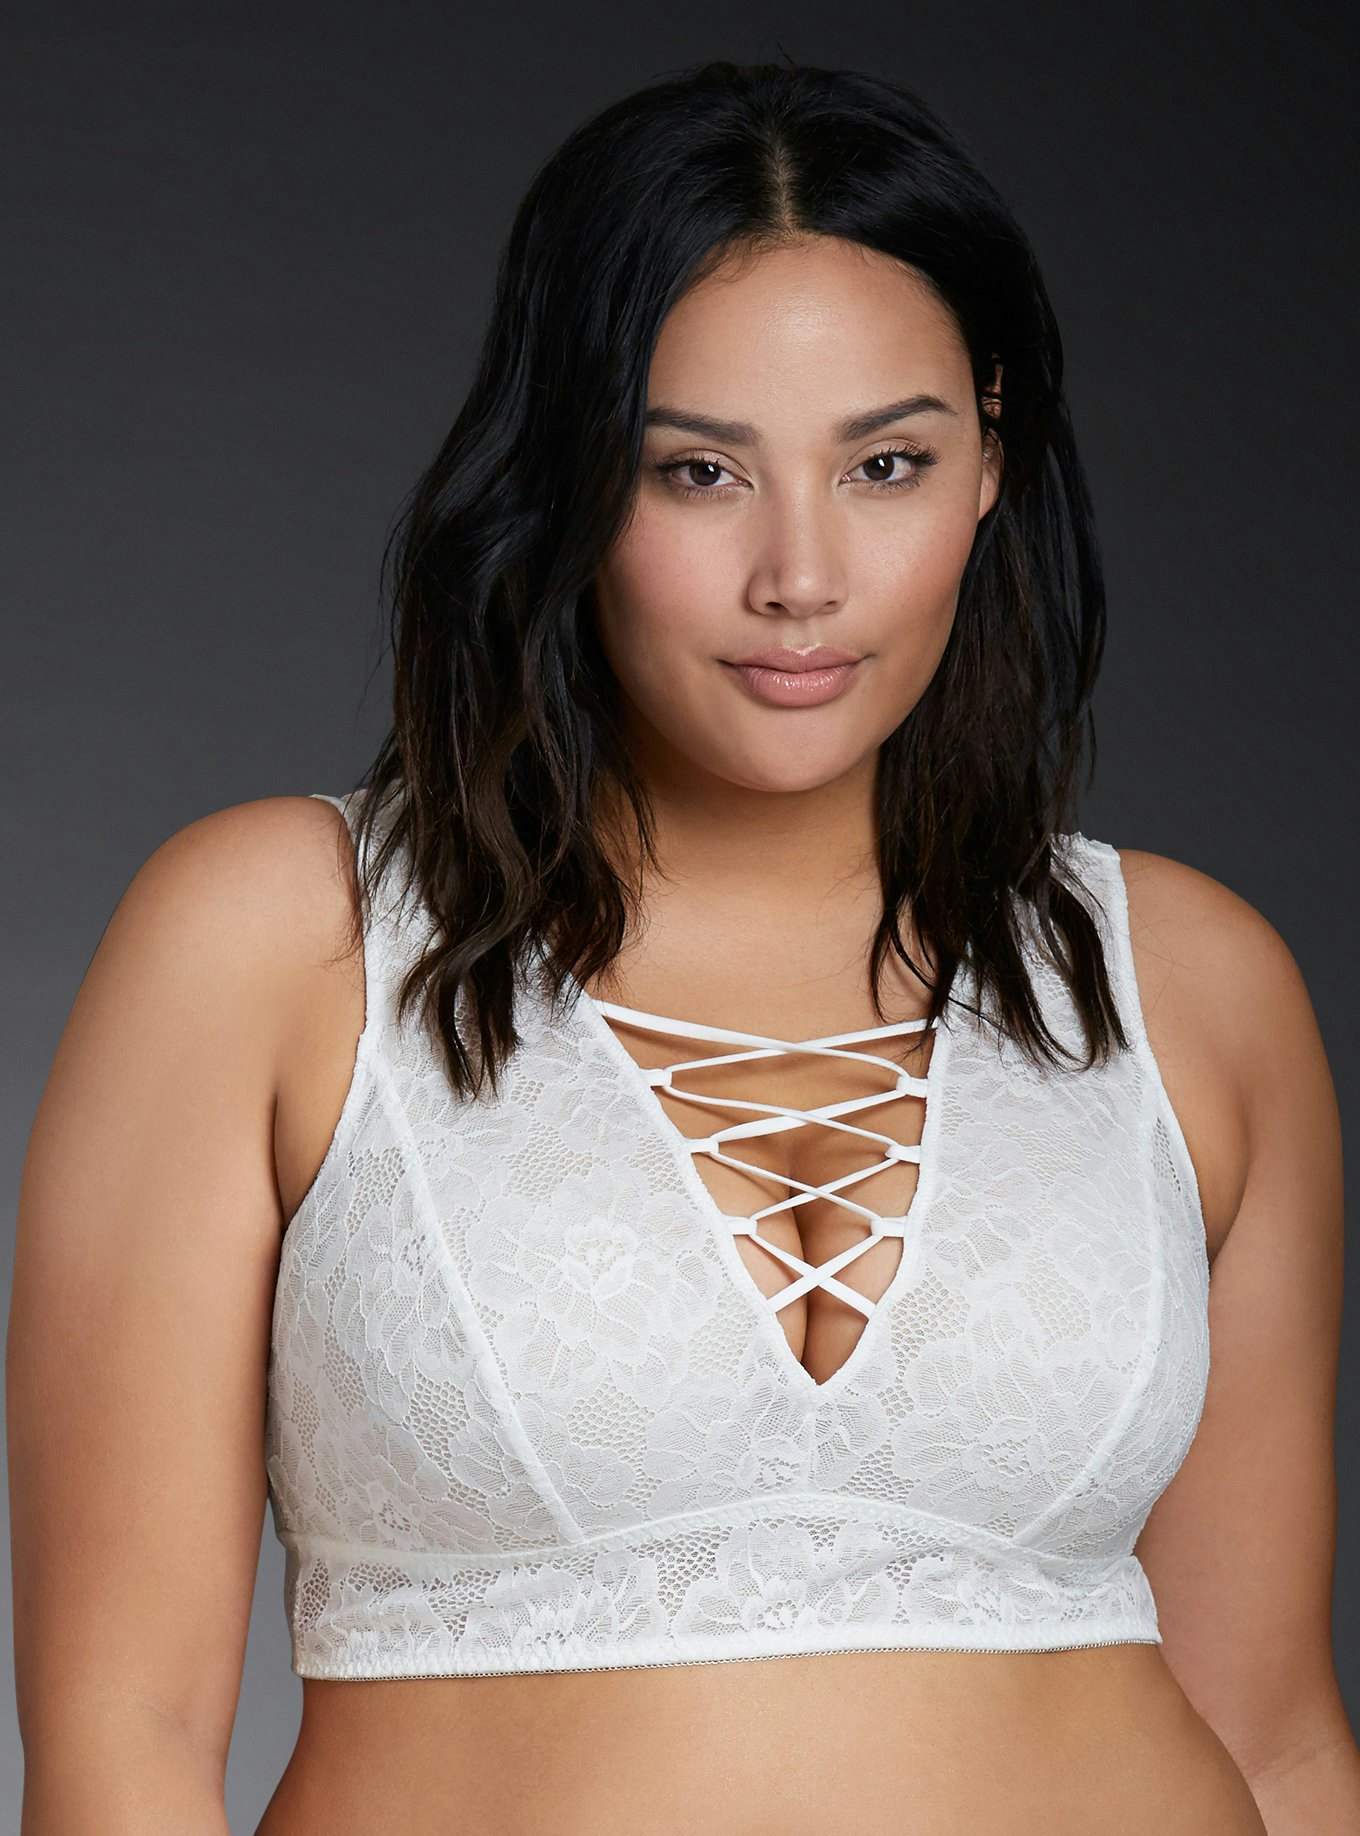 10 Gorgeous Bras You'll Want to Show Off - Brit + Co